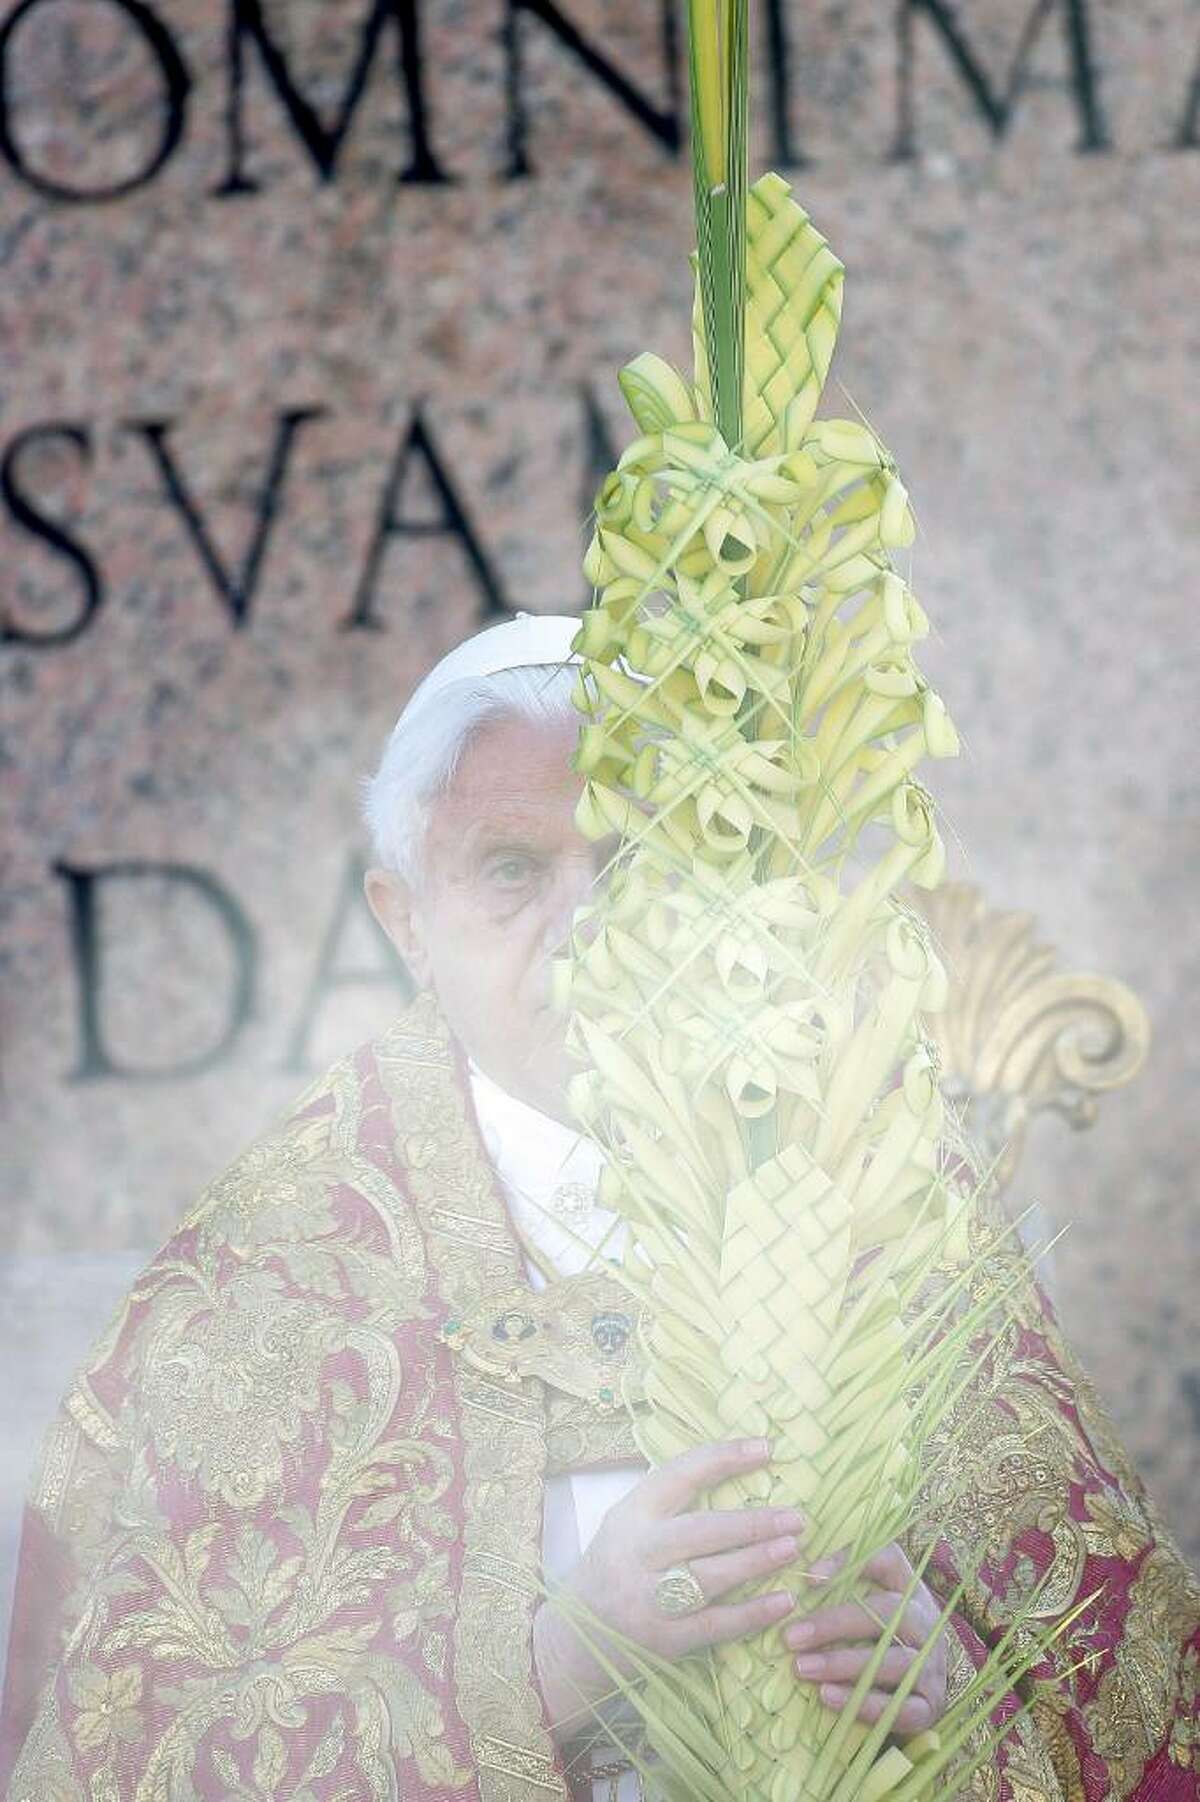 VATICAN CITY, VATICAN - MARCH 28: Pope Benedict XVI attends Palm Sunday Mass on March 28, 2010 in Vatican City, Vatican. The Pope is now facing pressure over abuse allegations which involved the German, the American and the Irish Catholic Church. (Photo by Franco Origlia/Getty Images) *** Local Caption *** Benedict XVI